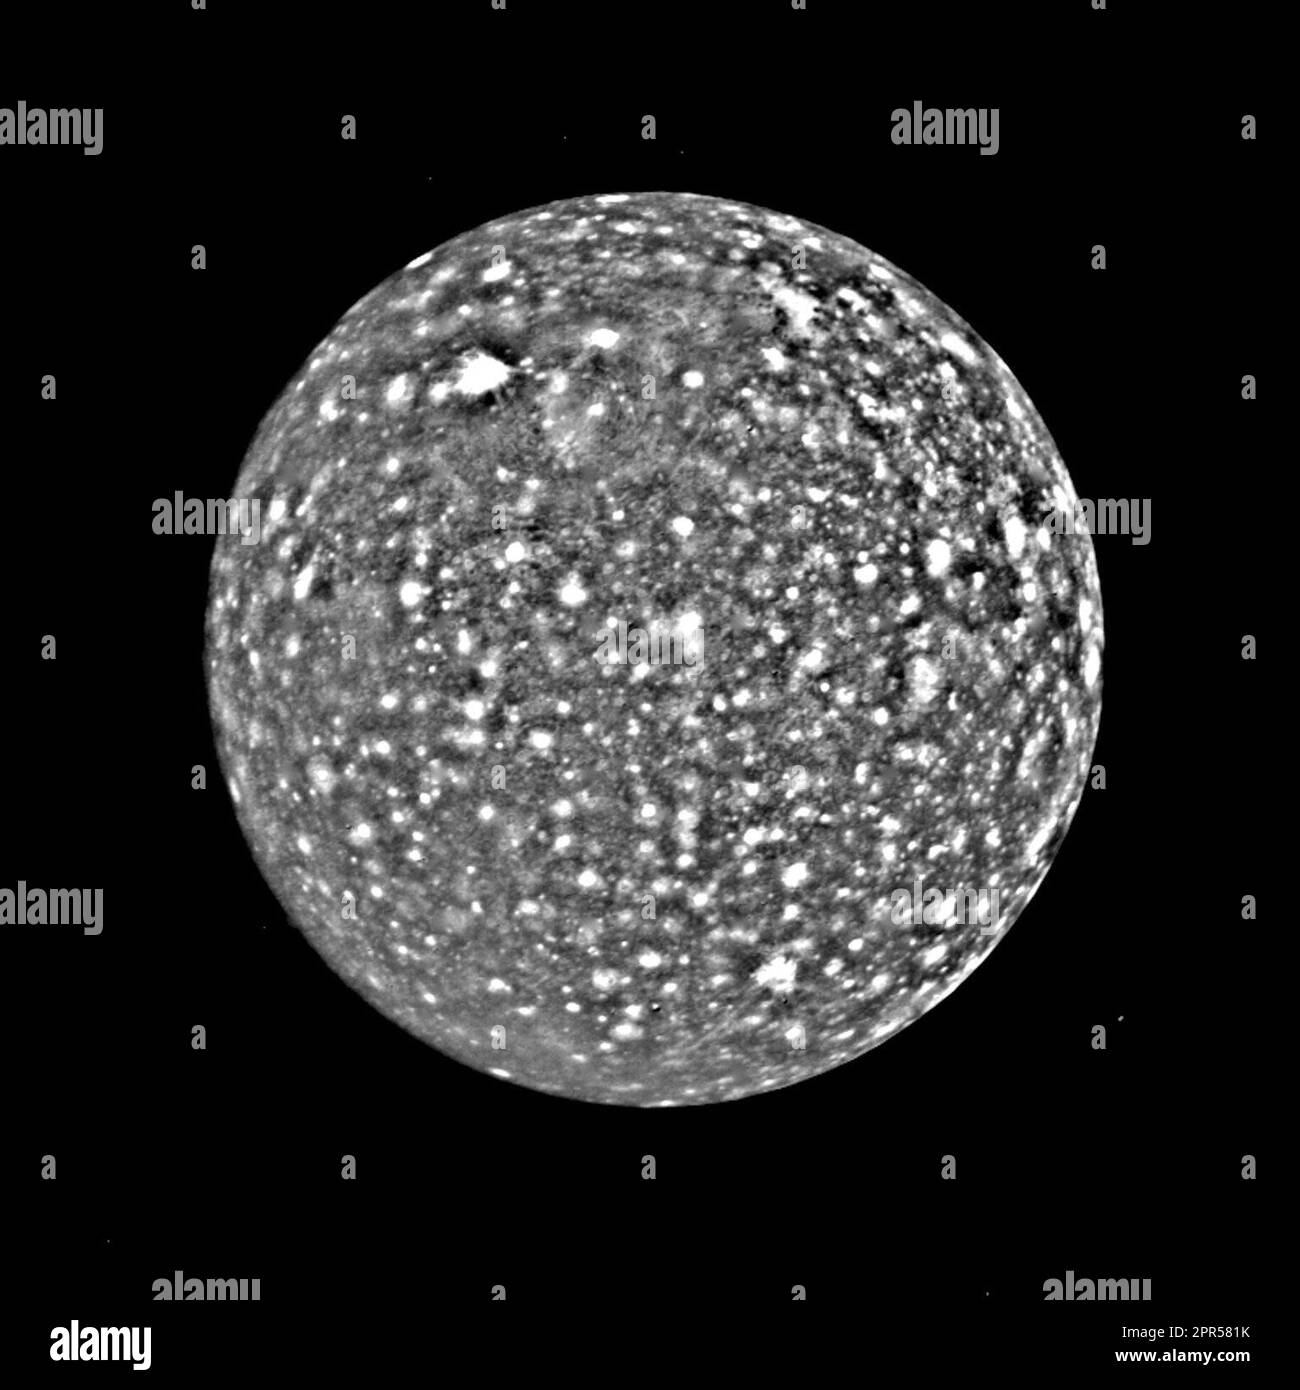 Voyager 1 took this picture of Callisto during Voyager's approach to Jupiter's outer large satellite in 1979. Both Galileo and Marius discovered Callisto in 1610. In Greek mythology, Callisto was a nymph loved by Zeus and thus hated by Hera. Hera turned her into a bear, which Zeus placed in the heavens as the constellation Ursa Major. Voyager was 350,000 kilometers from Callisto and took this picture that shows features about seven kilometers wide across the surface. Callisto is a little smaller than Ganymede (Callisto is about the size of Mercury) and it seems that it is composed of a mixture Stock Photo